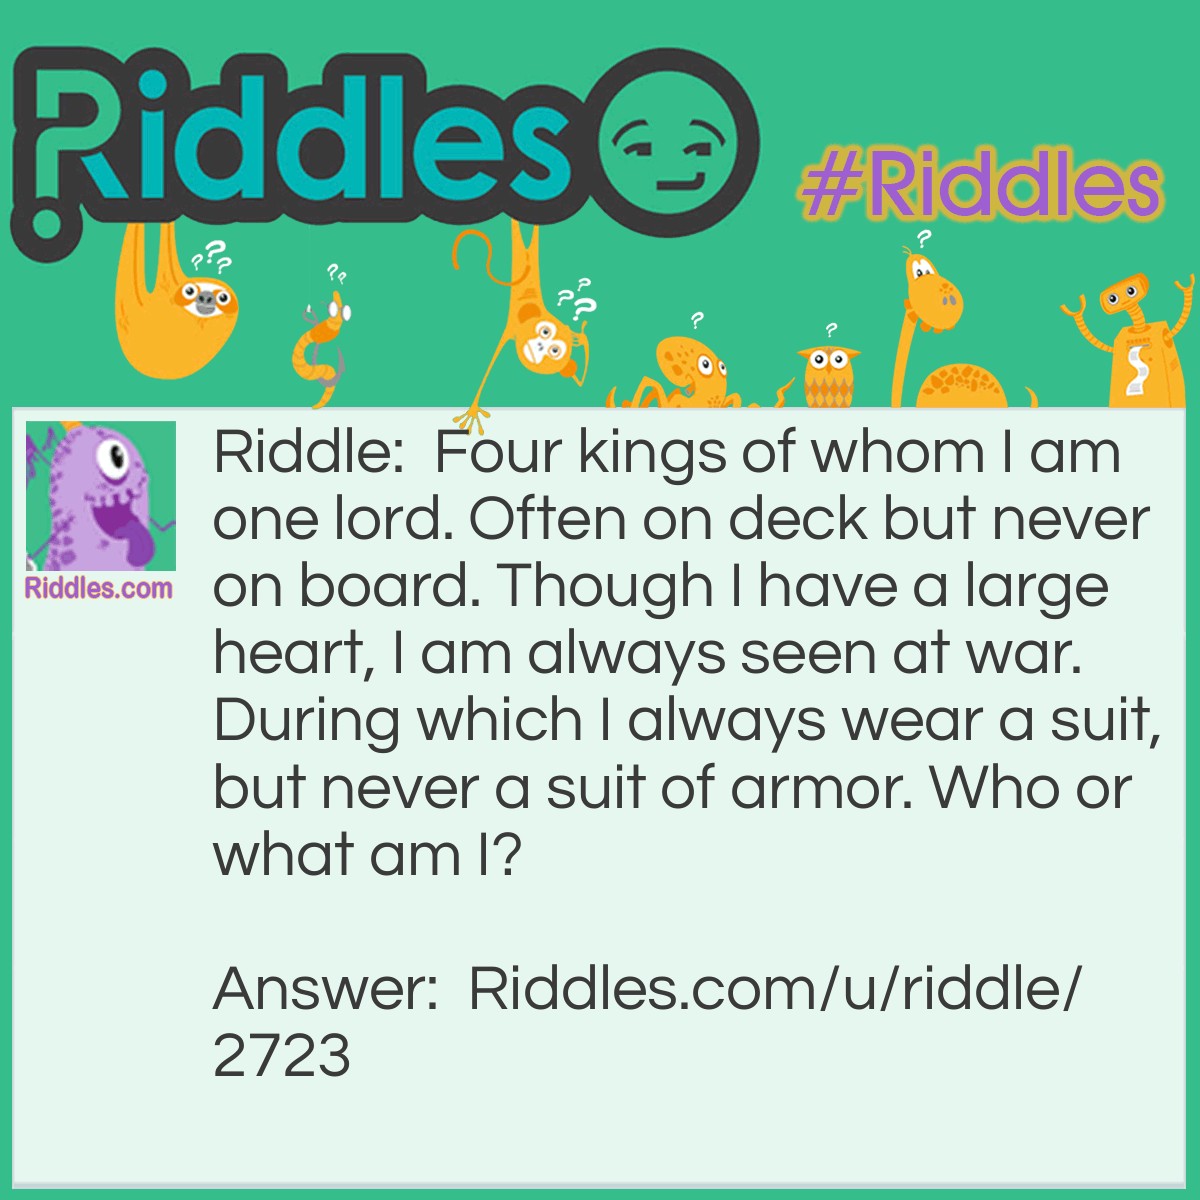 Riddle: Four kings of whom I am one lord. Often on deck but never on board. Though I have a large heart, I am always seen at war. During which I always wear a suit, but never a suit of armor. Who am I? Answer: The king of hearts.